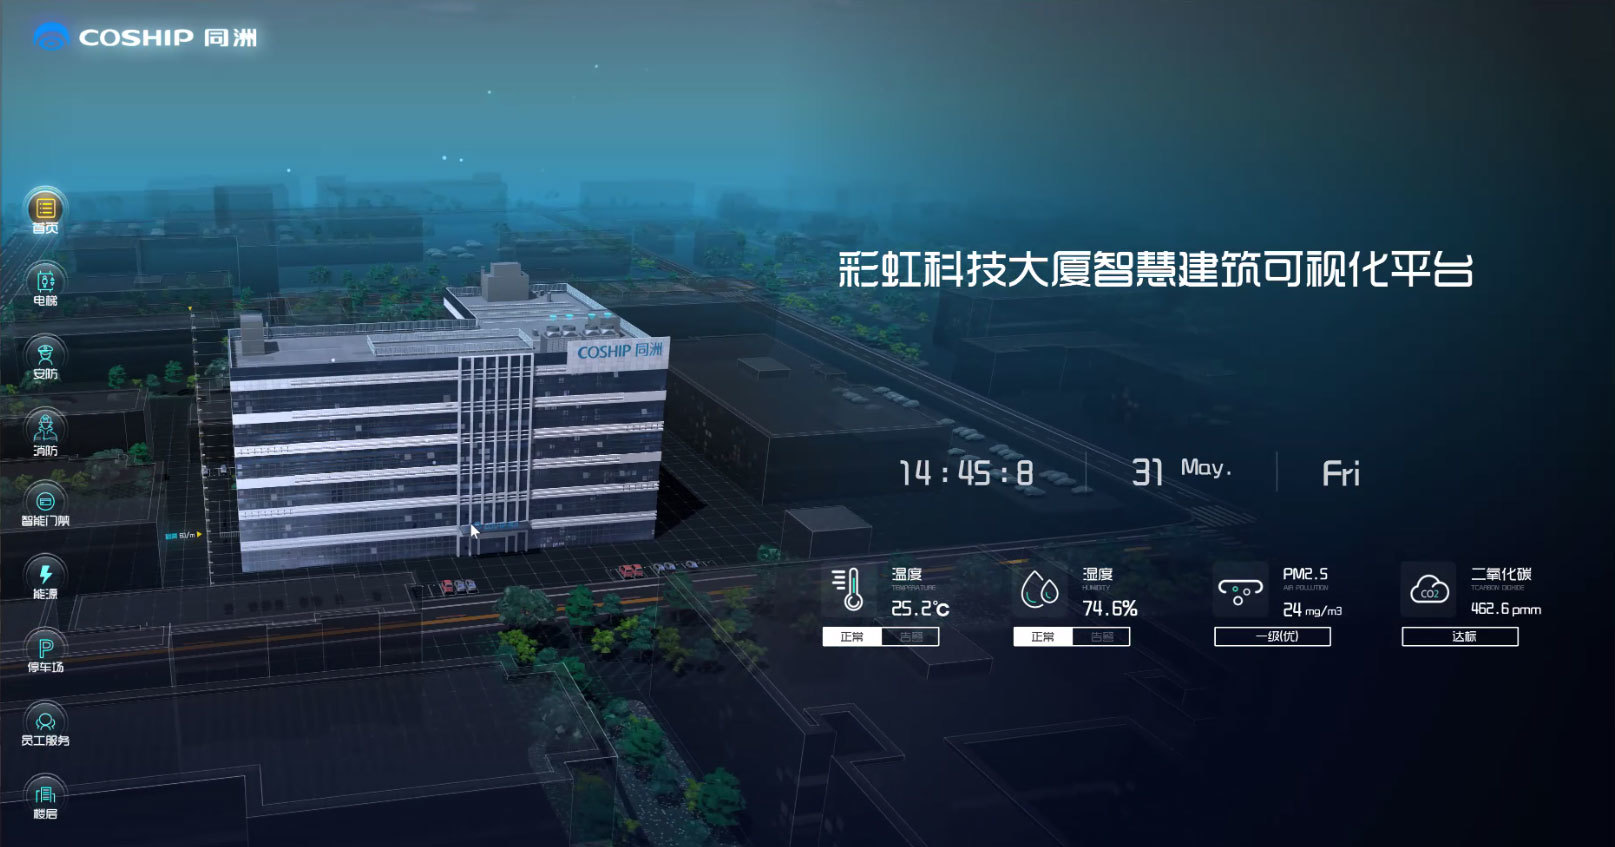 ISEC2019｜Tongzhou Smart Architecture - Make Architecture a Four-Dimensional Space